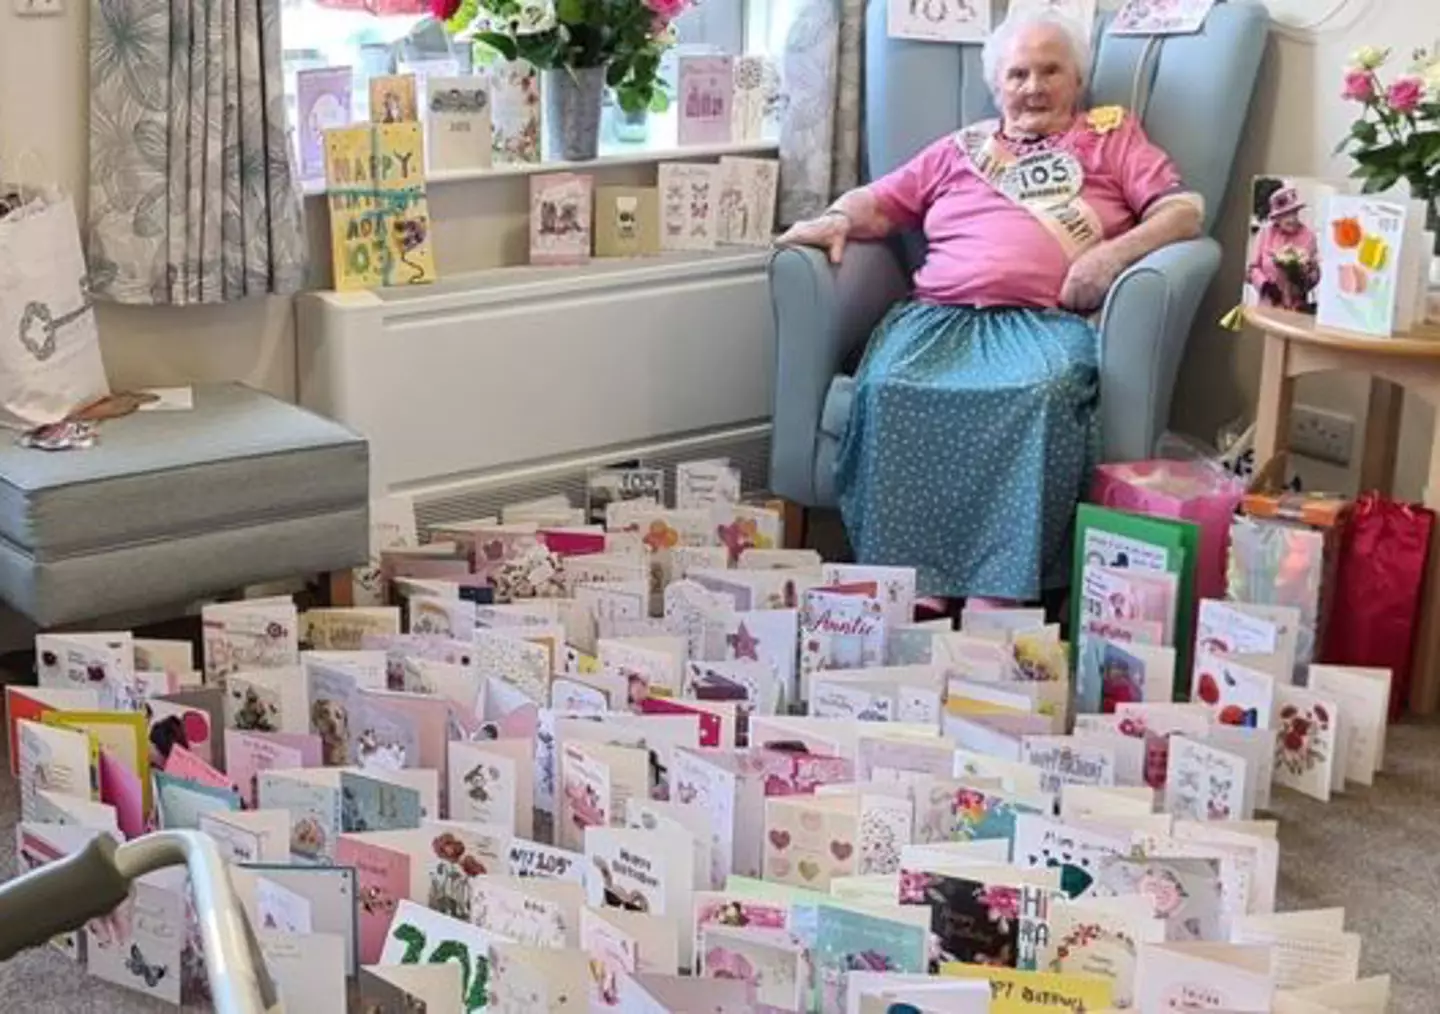 Ada’s care home previously launched an appeal for cards when she turned 105 in 2020.